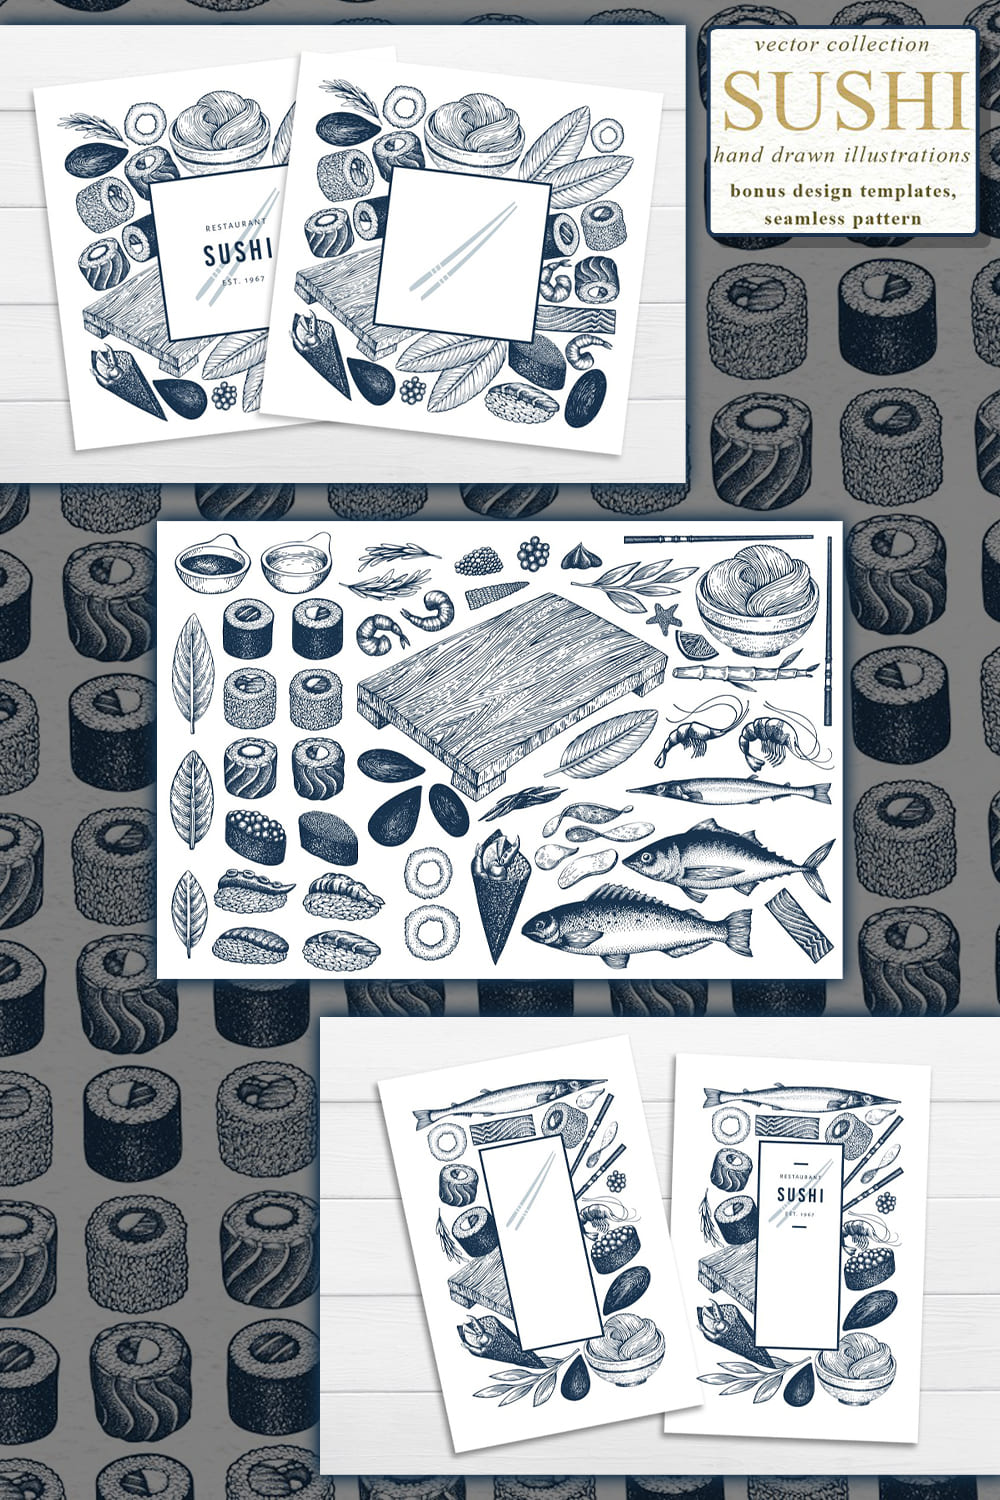 Sushi Vector Collection pinterest image.